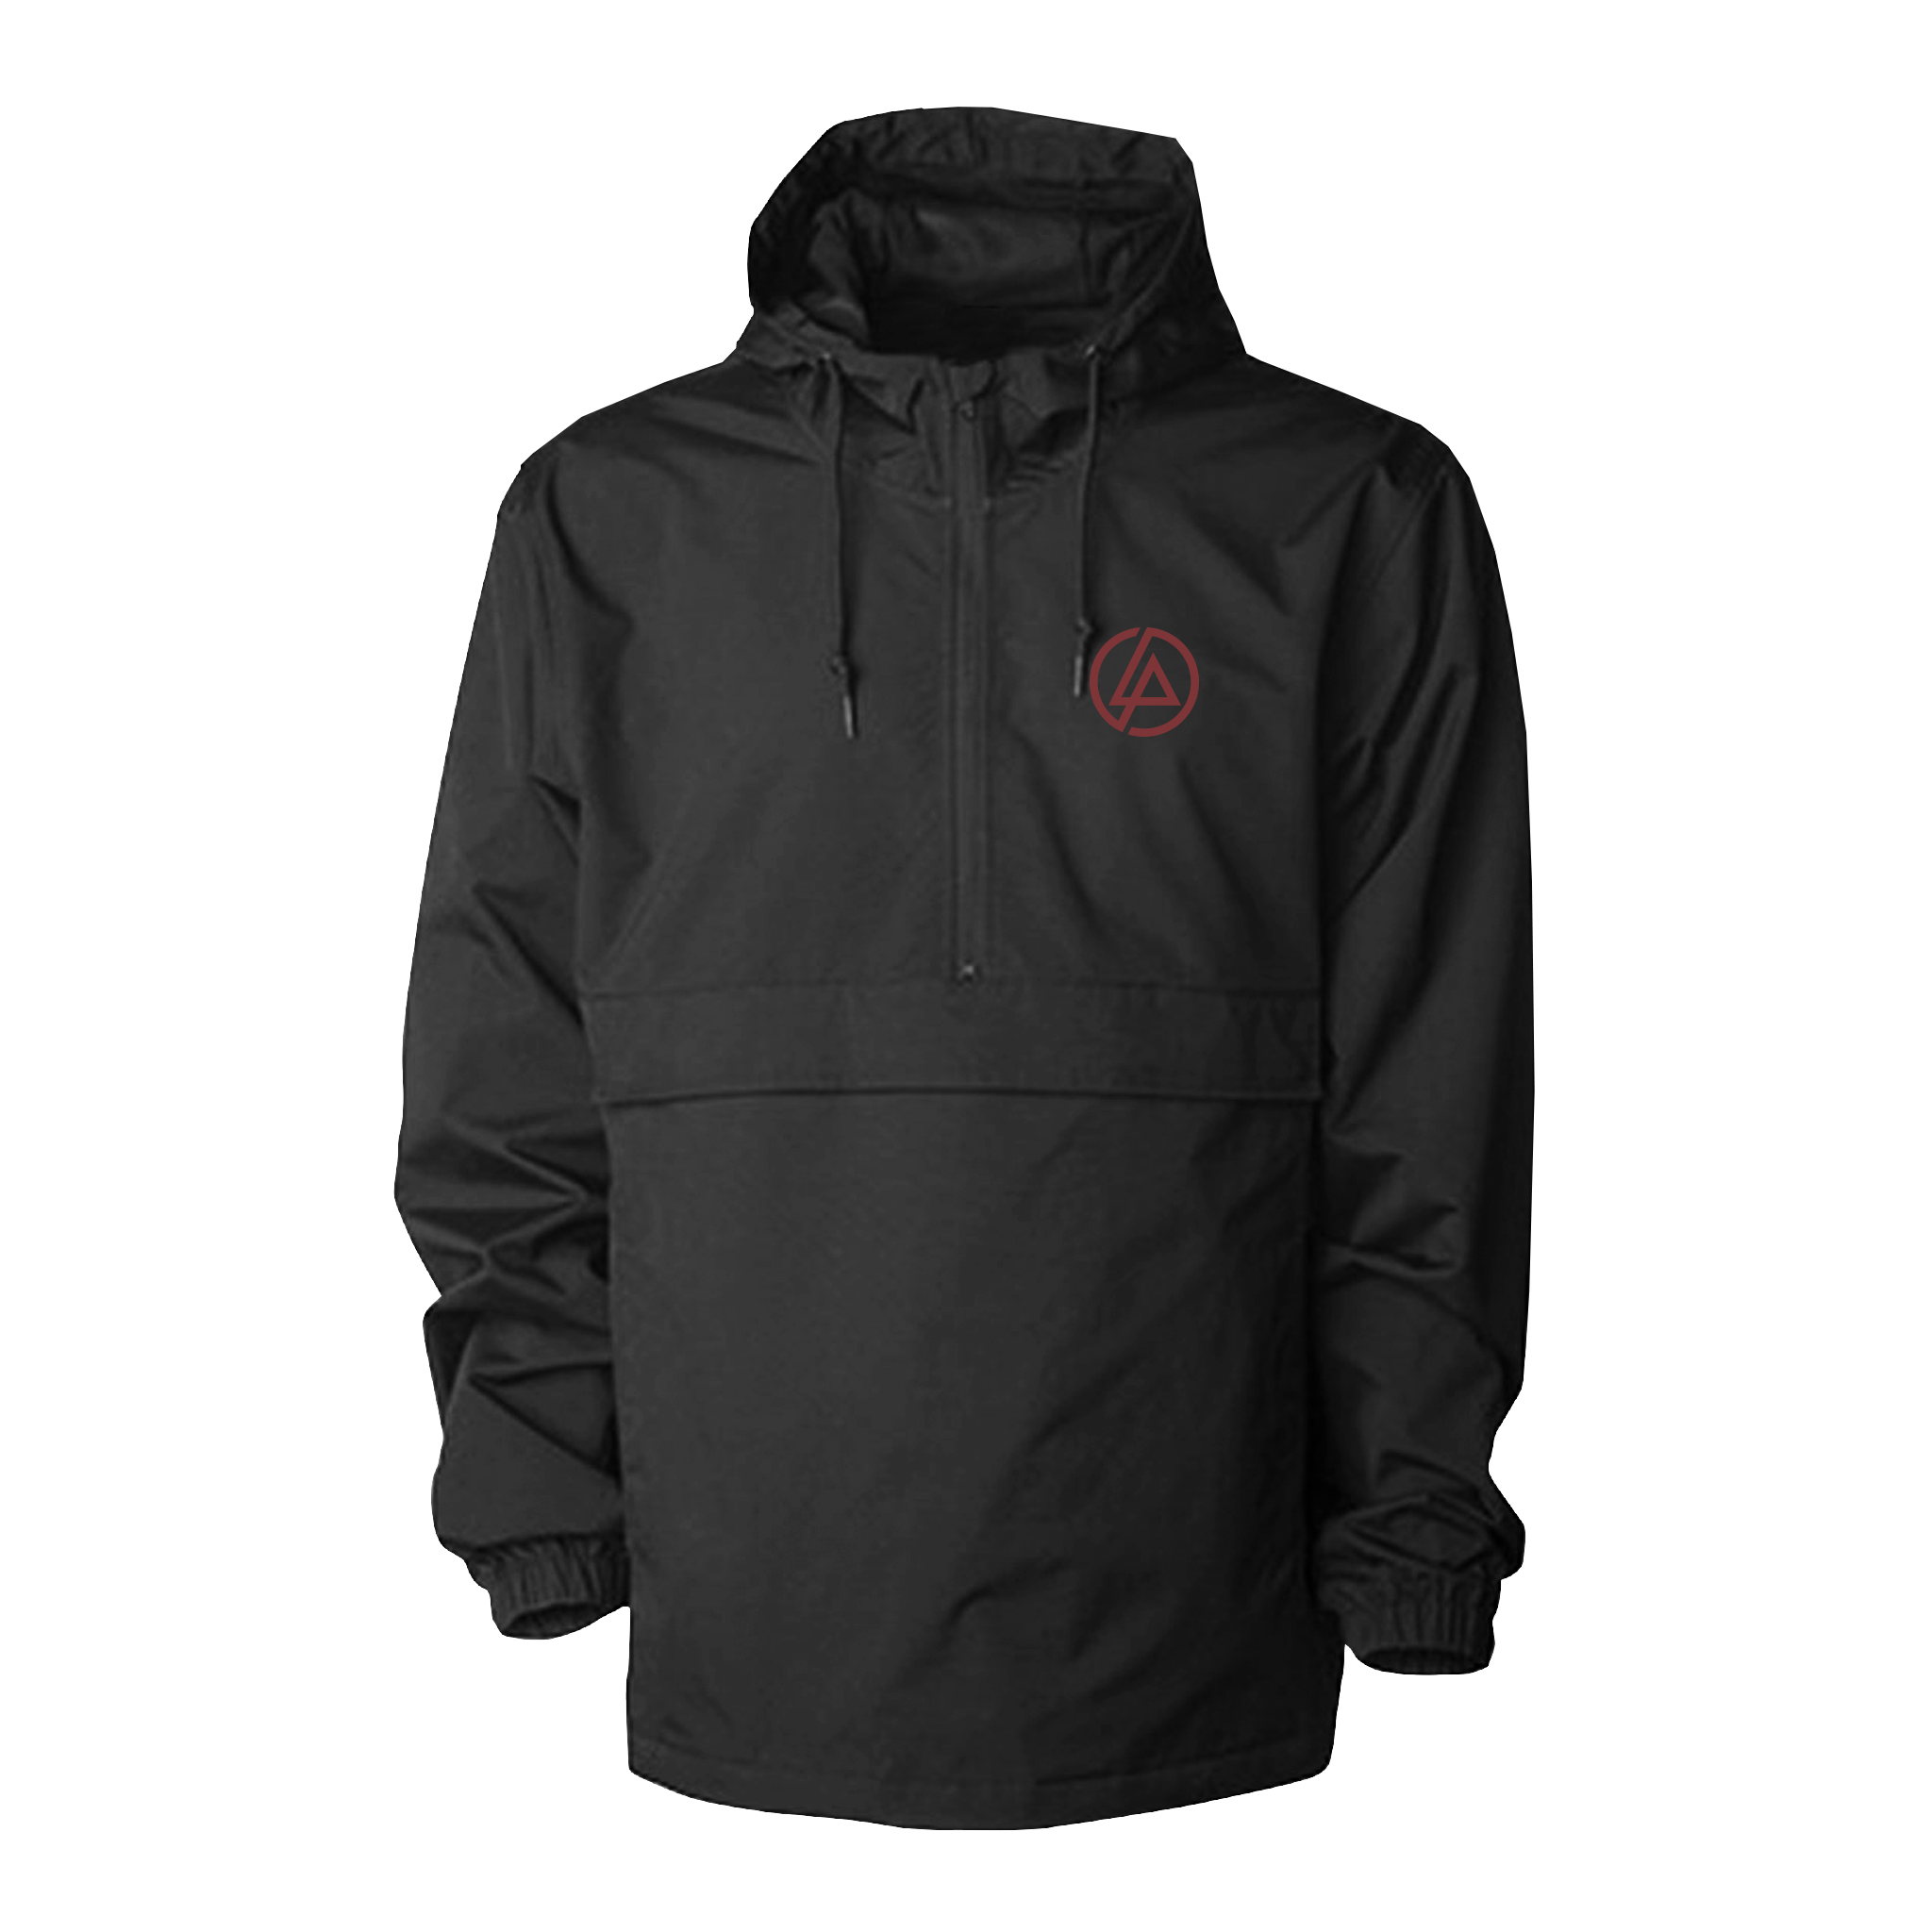 Living Things Anorak Jacket | Outerwear | Linkin Park Store